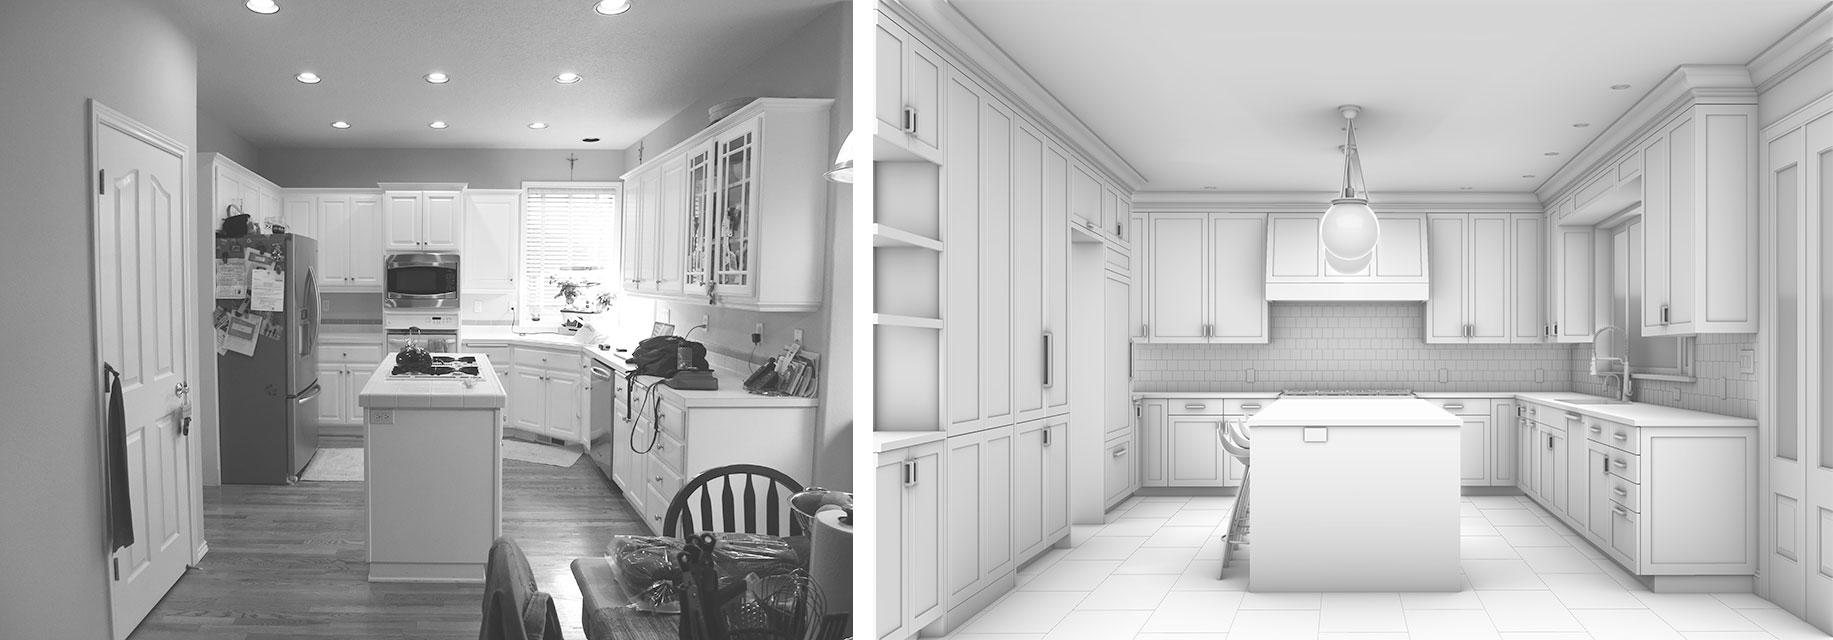 The photo on the left is the kitchen before renovations and the photo on the right is the kitchen after renovations.